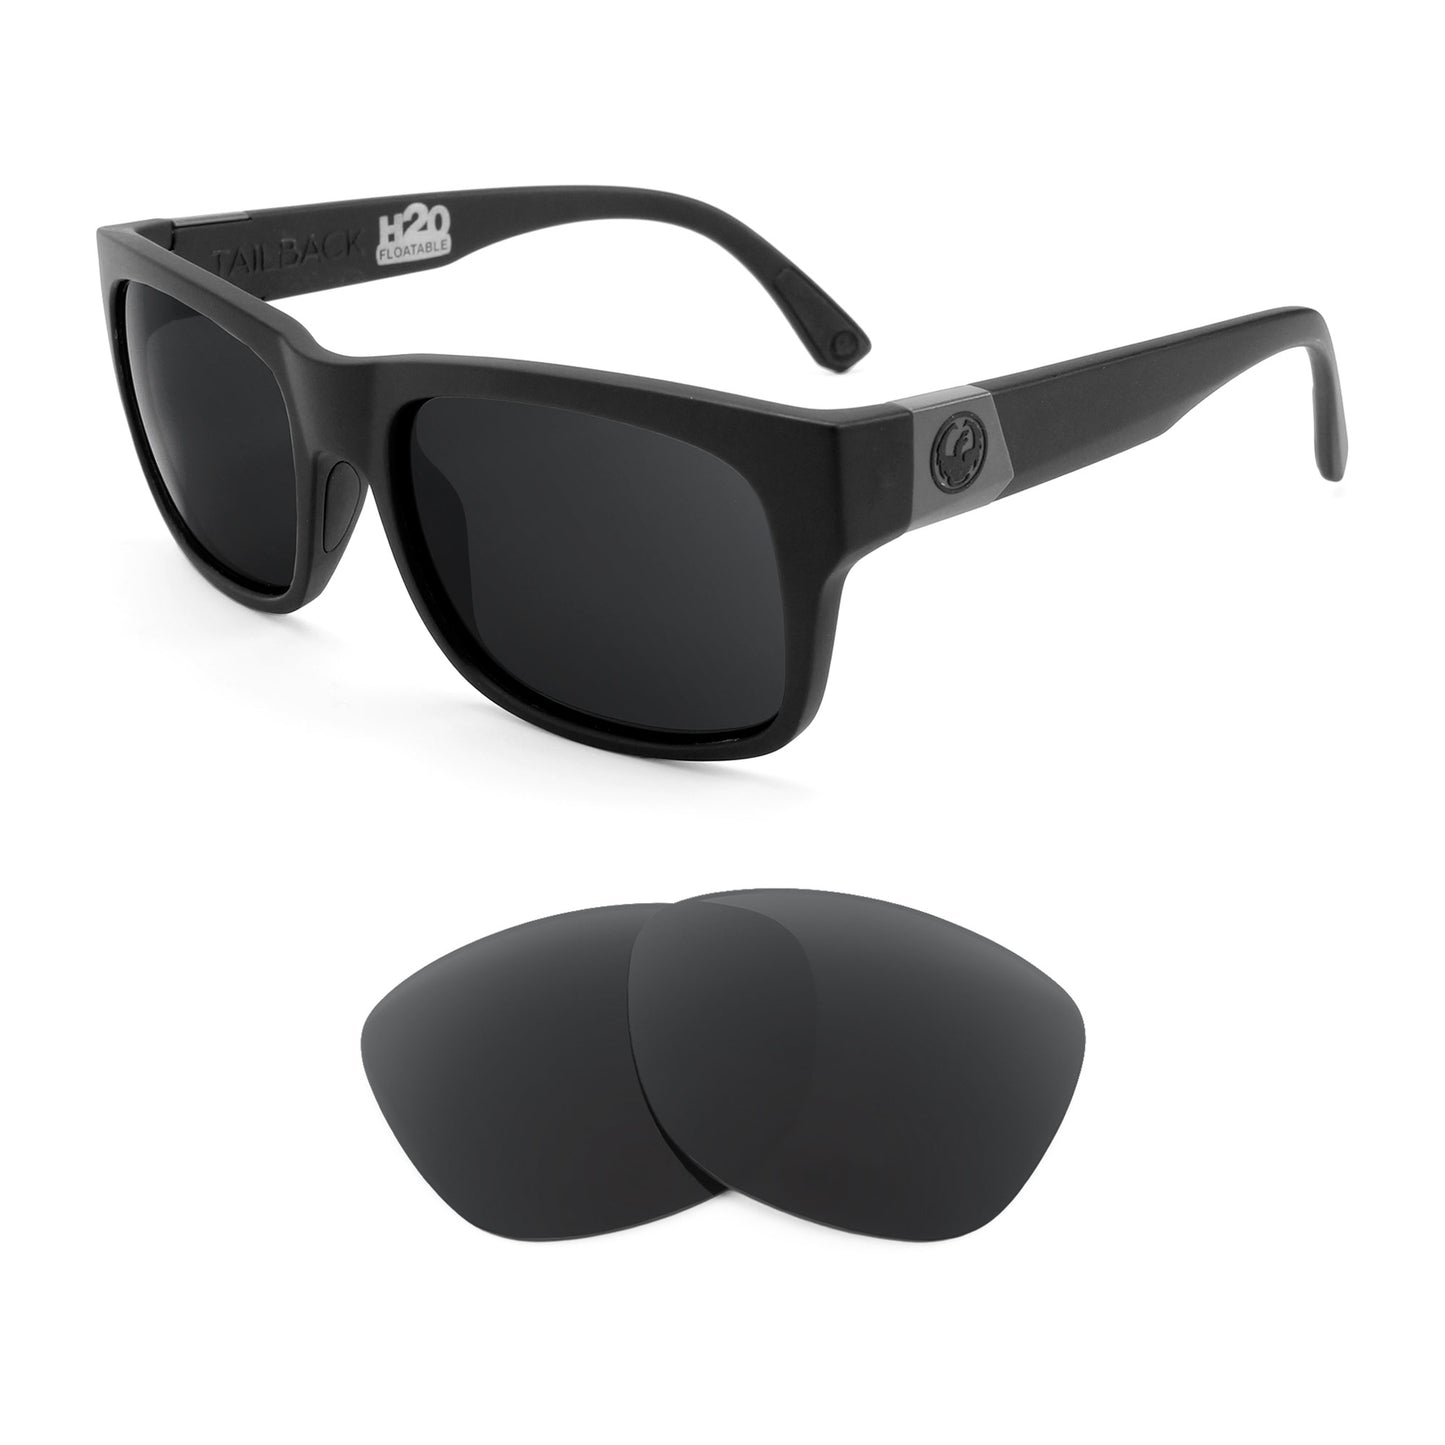 Dragon Tailback sunglasses with replacement lenses